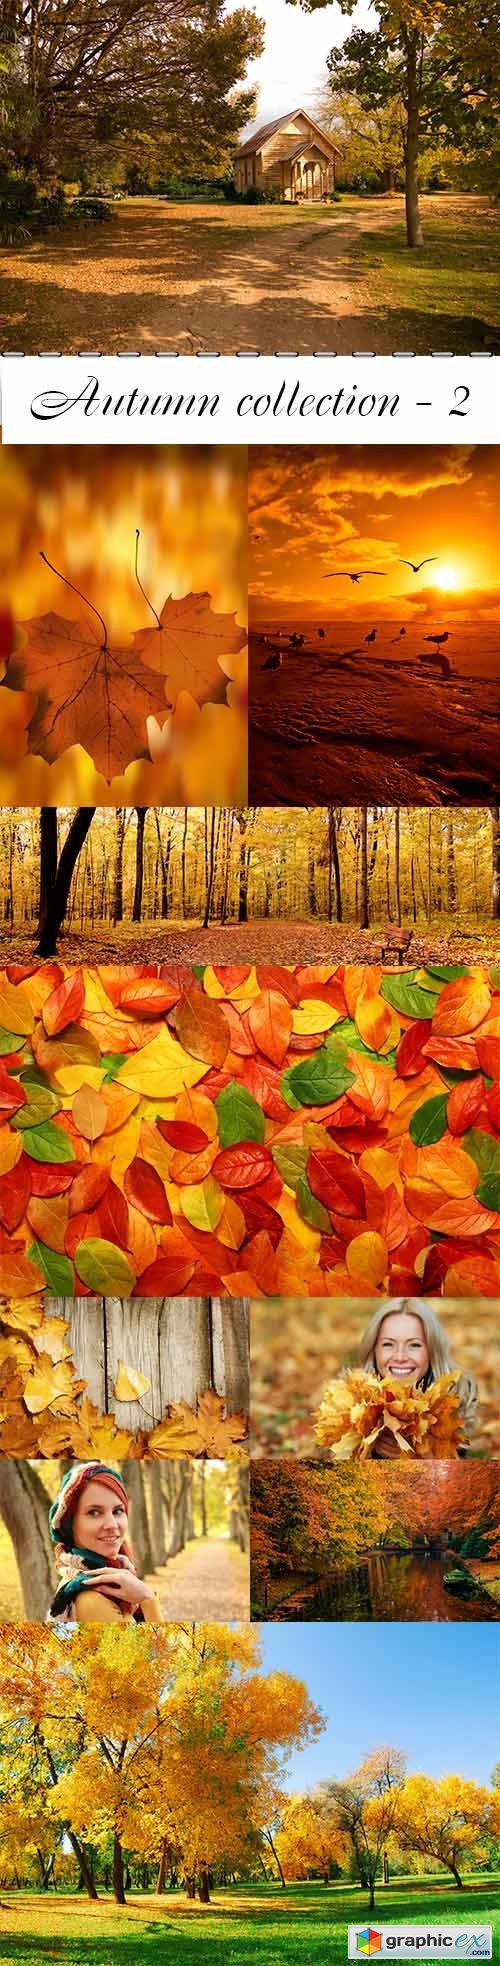 Autumn collection raster graphics - 2